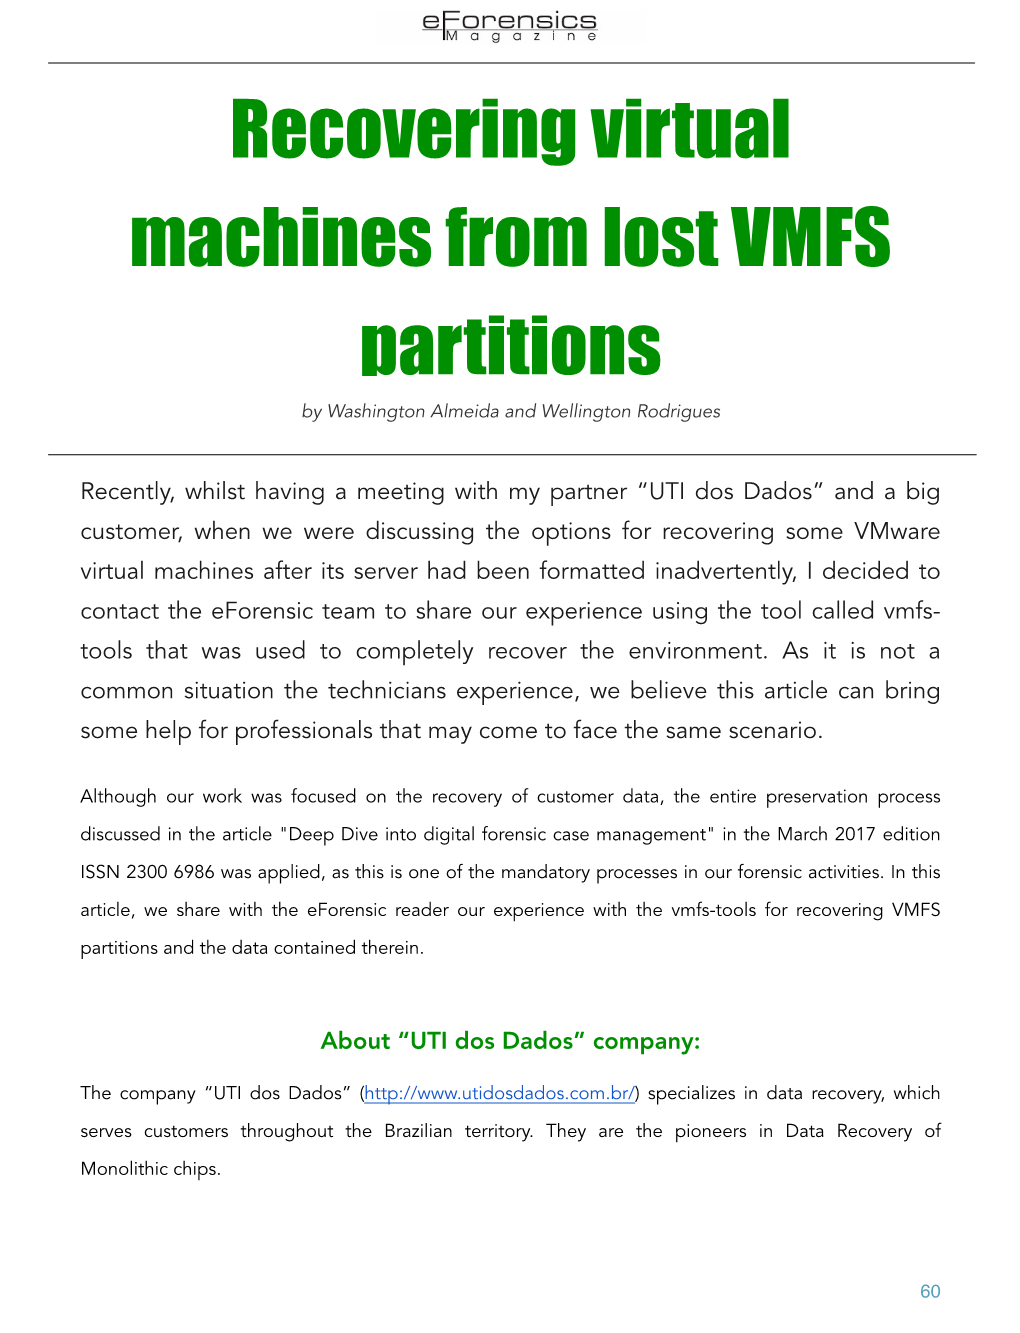 Recovering Virtual Machines from Lost VMFS Partitions by Washington Almeida and Wellington Rodrigues